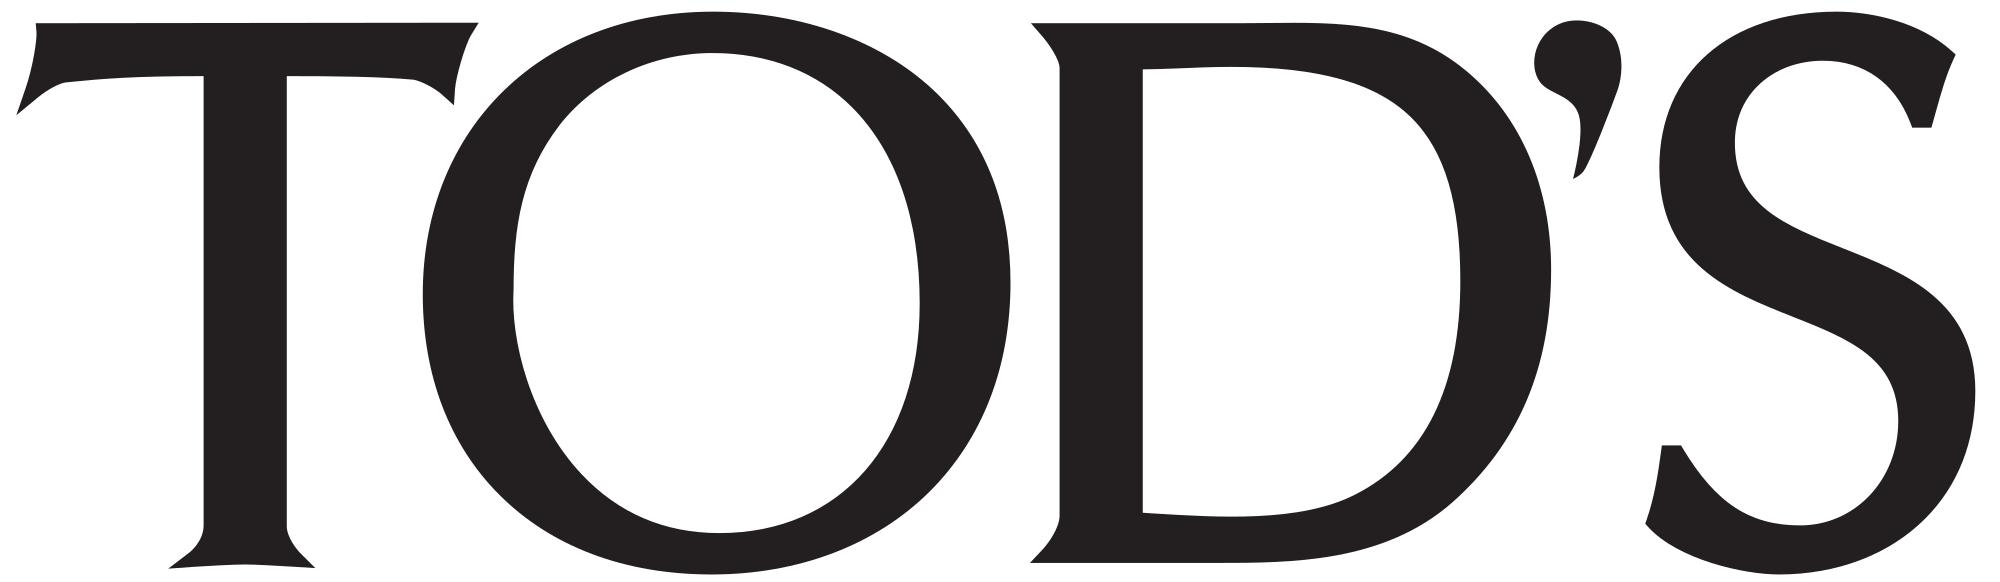 Tod's Logo - File:Tods.svg - Wikimedia Commons